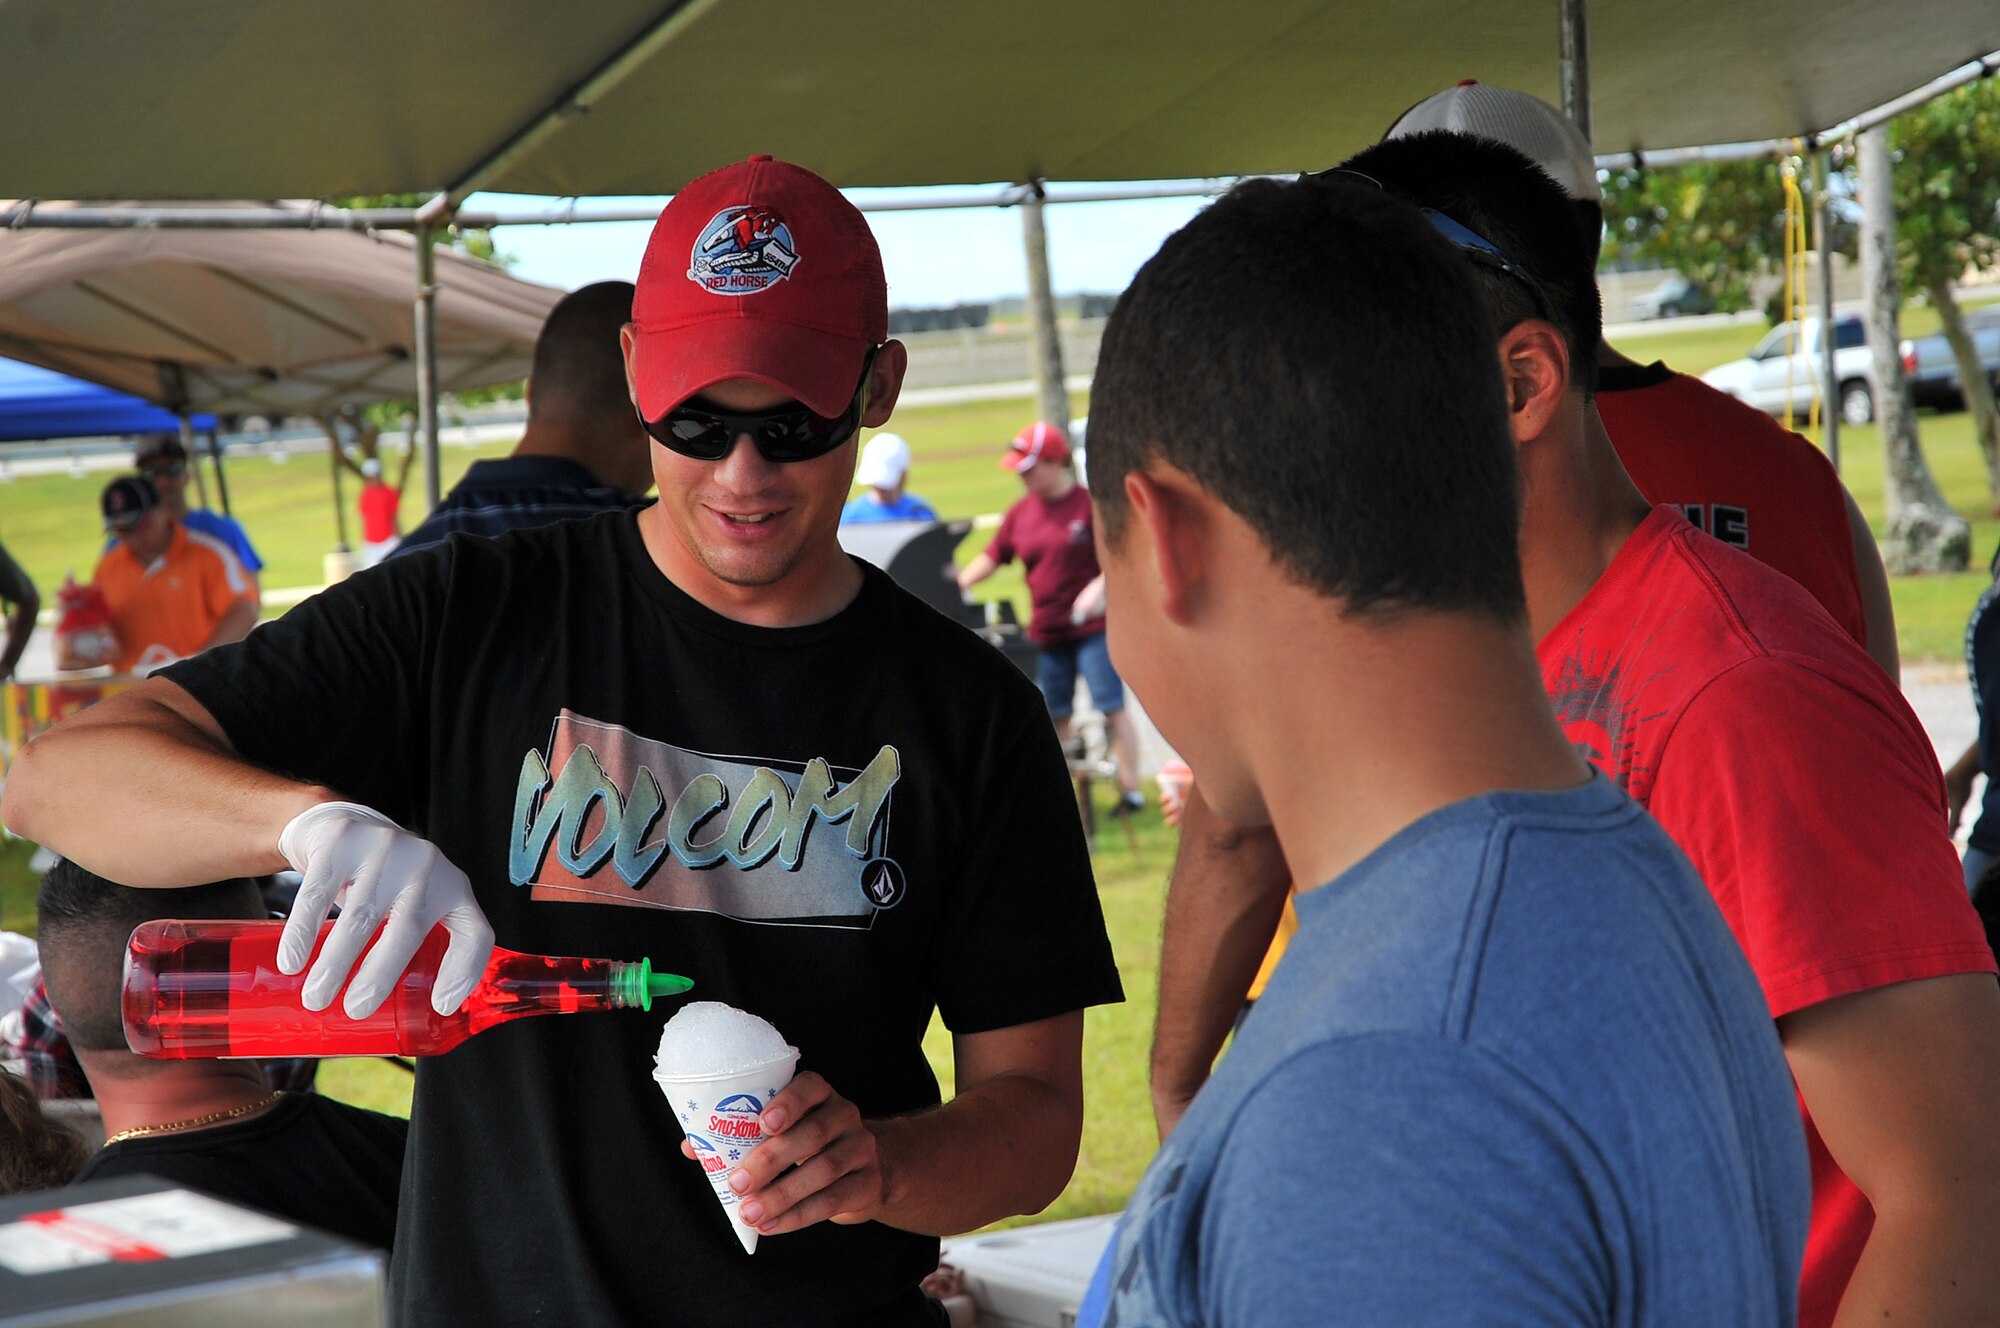 Senior Airman Timothy Bidwell, 554th RED HORSE Squadron, prepares a snow cone for a customer during the Labor Day Bash Aug. 30, 2013, on Andersen Air Force Base, Guam. More than 200 military members and their families attended the event which was held at the Arc Light Memorial Park. (U.S. Air Force photo/Staff Sgt. Melissa B. White/Released)